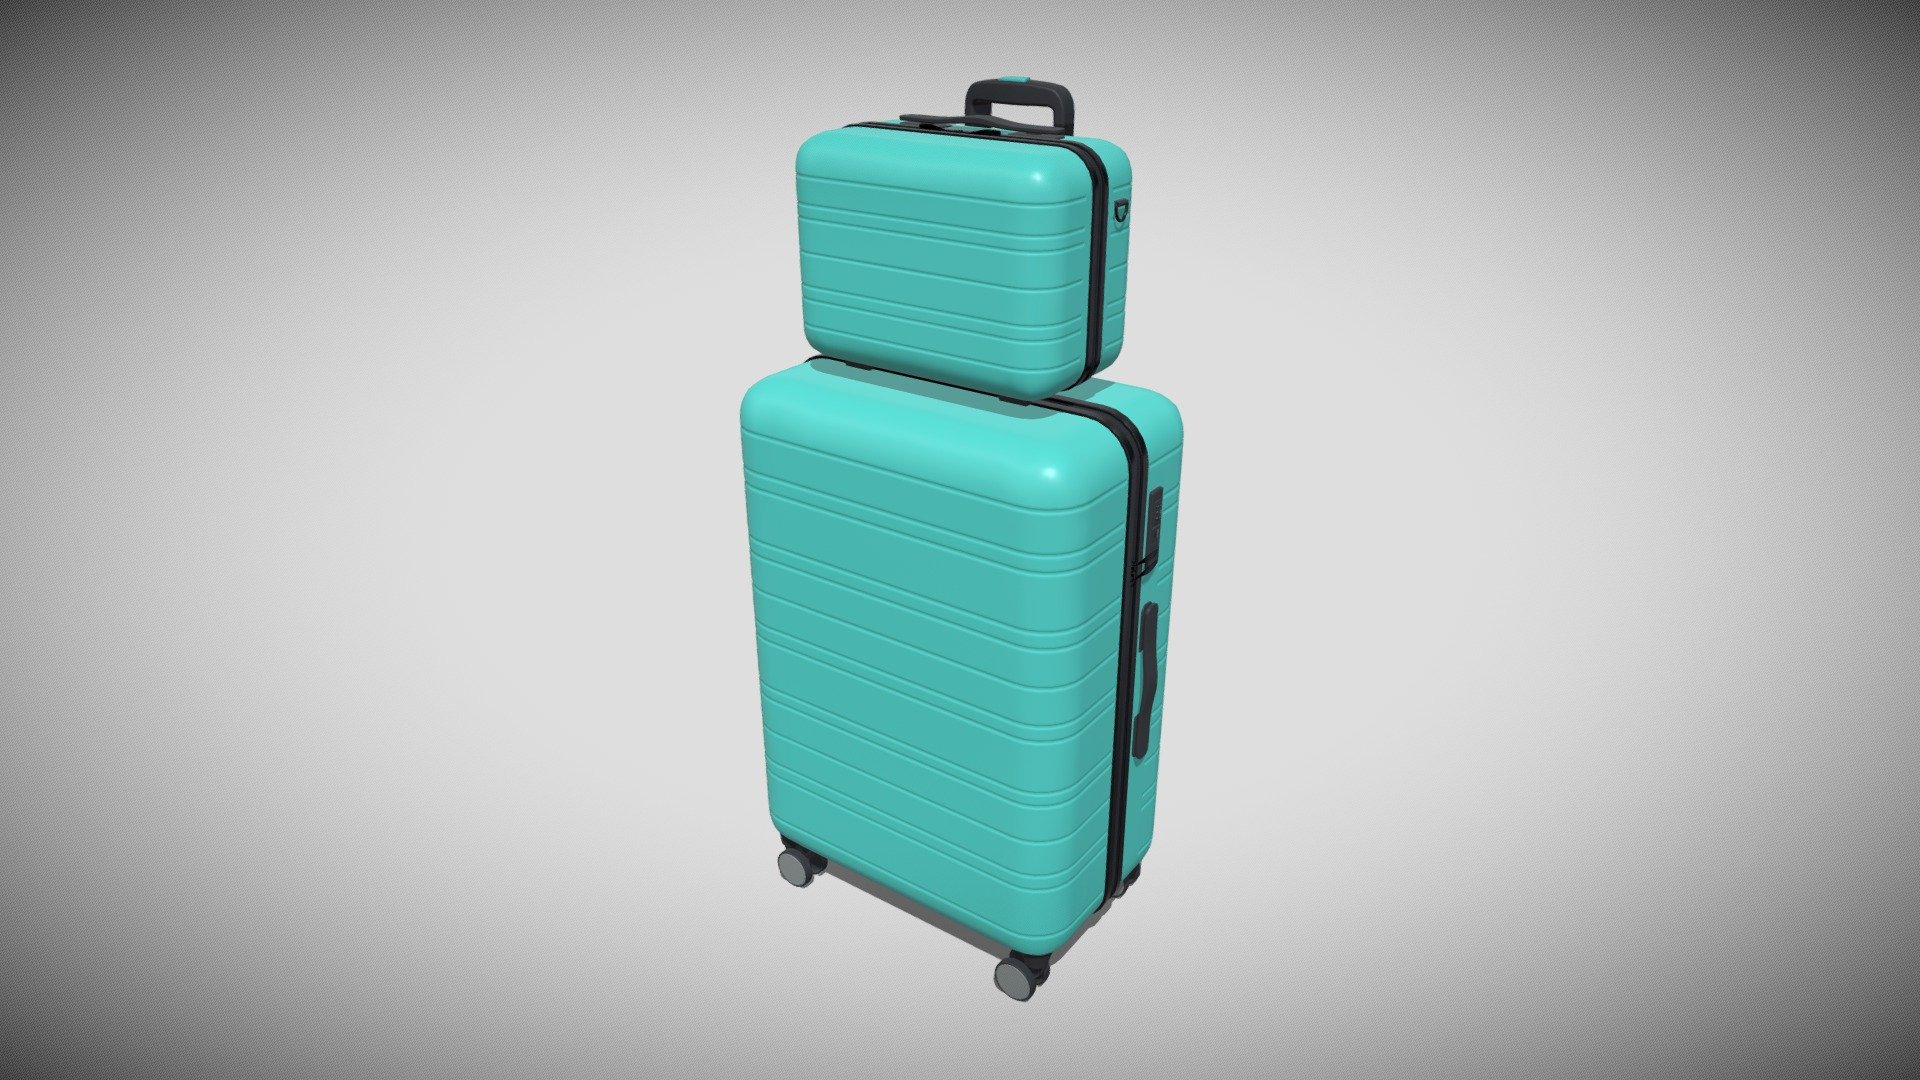 Detailed model of a Hardside Luggage Suitcase Set, modeled in Cinema 4D.The model was created using approximate real world dimensions.

The model has 35,355 polys and 35,490 vertices.

An additional file has been provided containing the original Cinema 4D project files with both standard and v-ray materials, textures and other 3d export files such as 3ds, fbx and obj 3d model